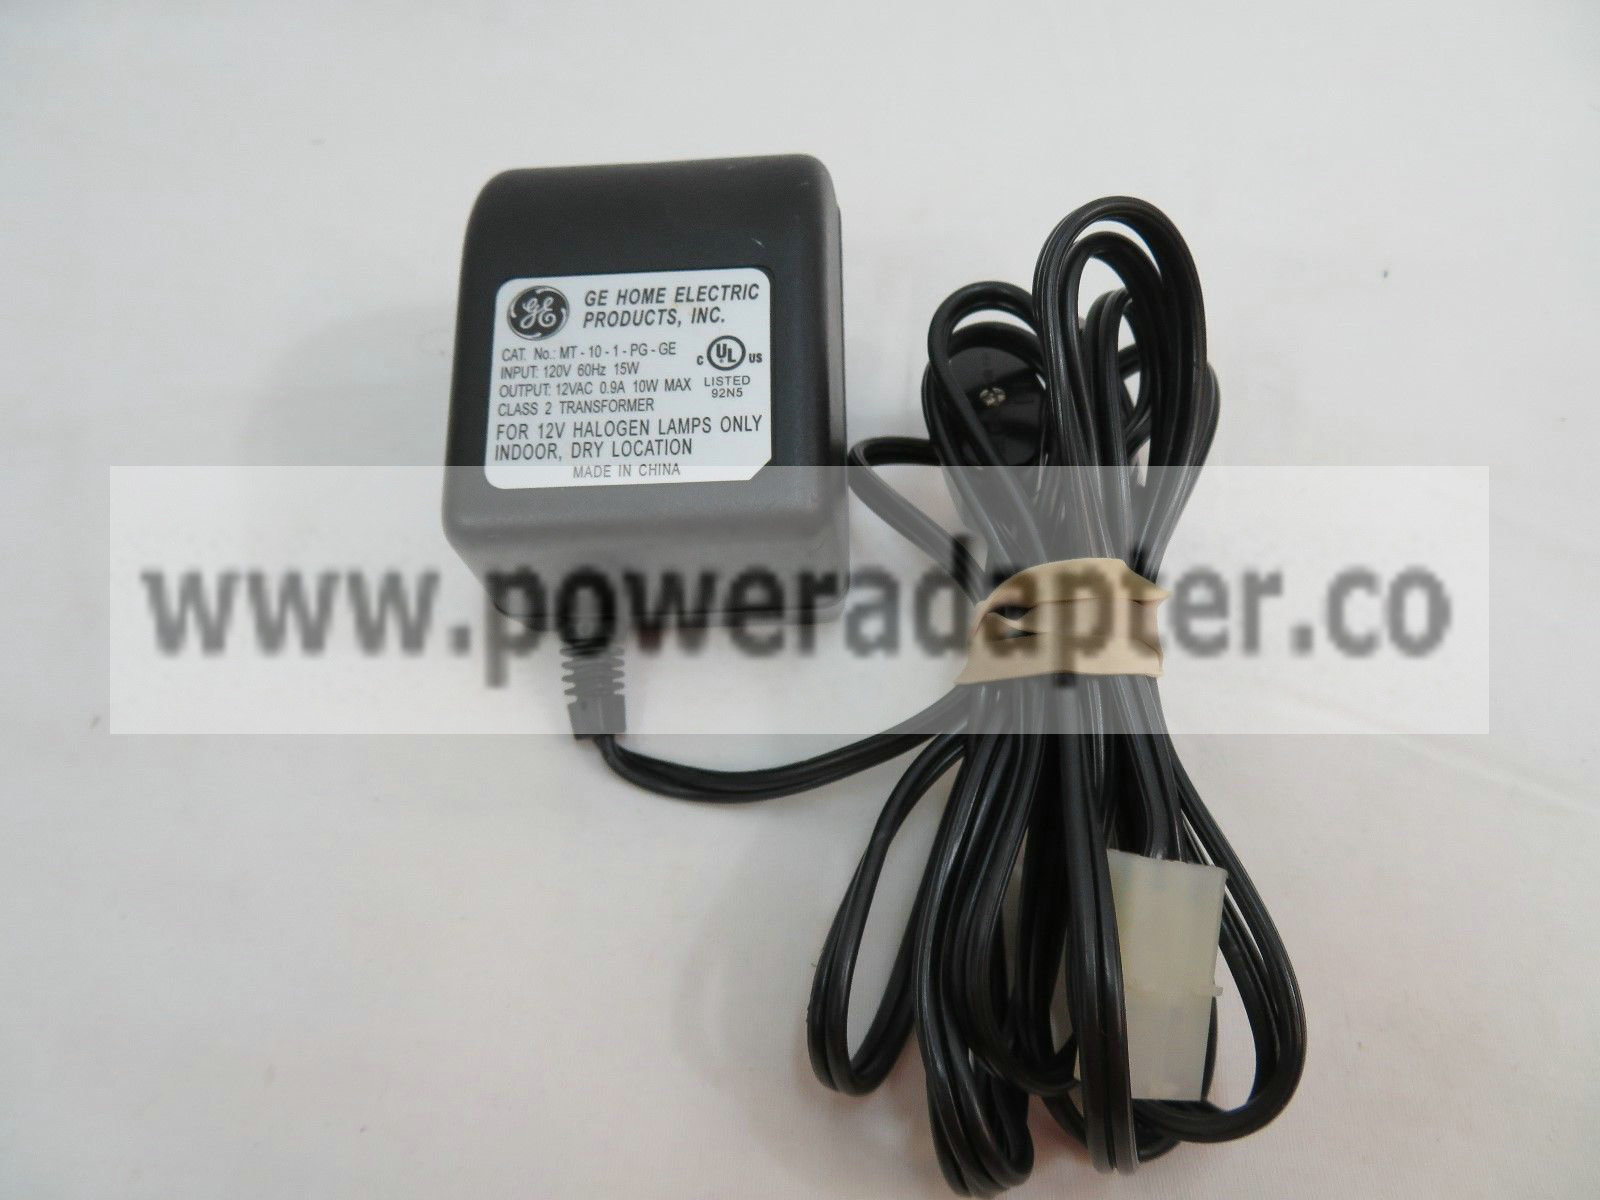 GE AC Adapter Power Supply 12VAC 0.9A Cat. MT-10-1-PG-GE model no:MT-10-1-PG-GE input:120v 60hz, 15w output:12VAC 0.9